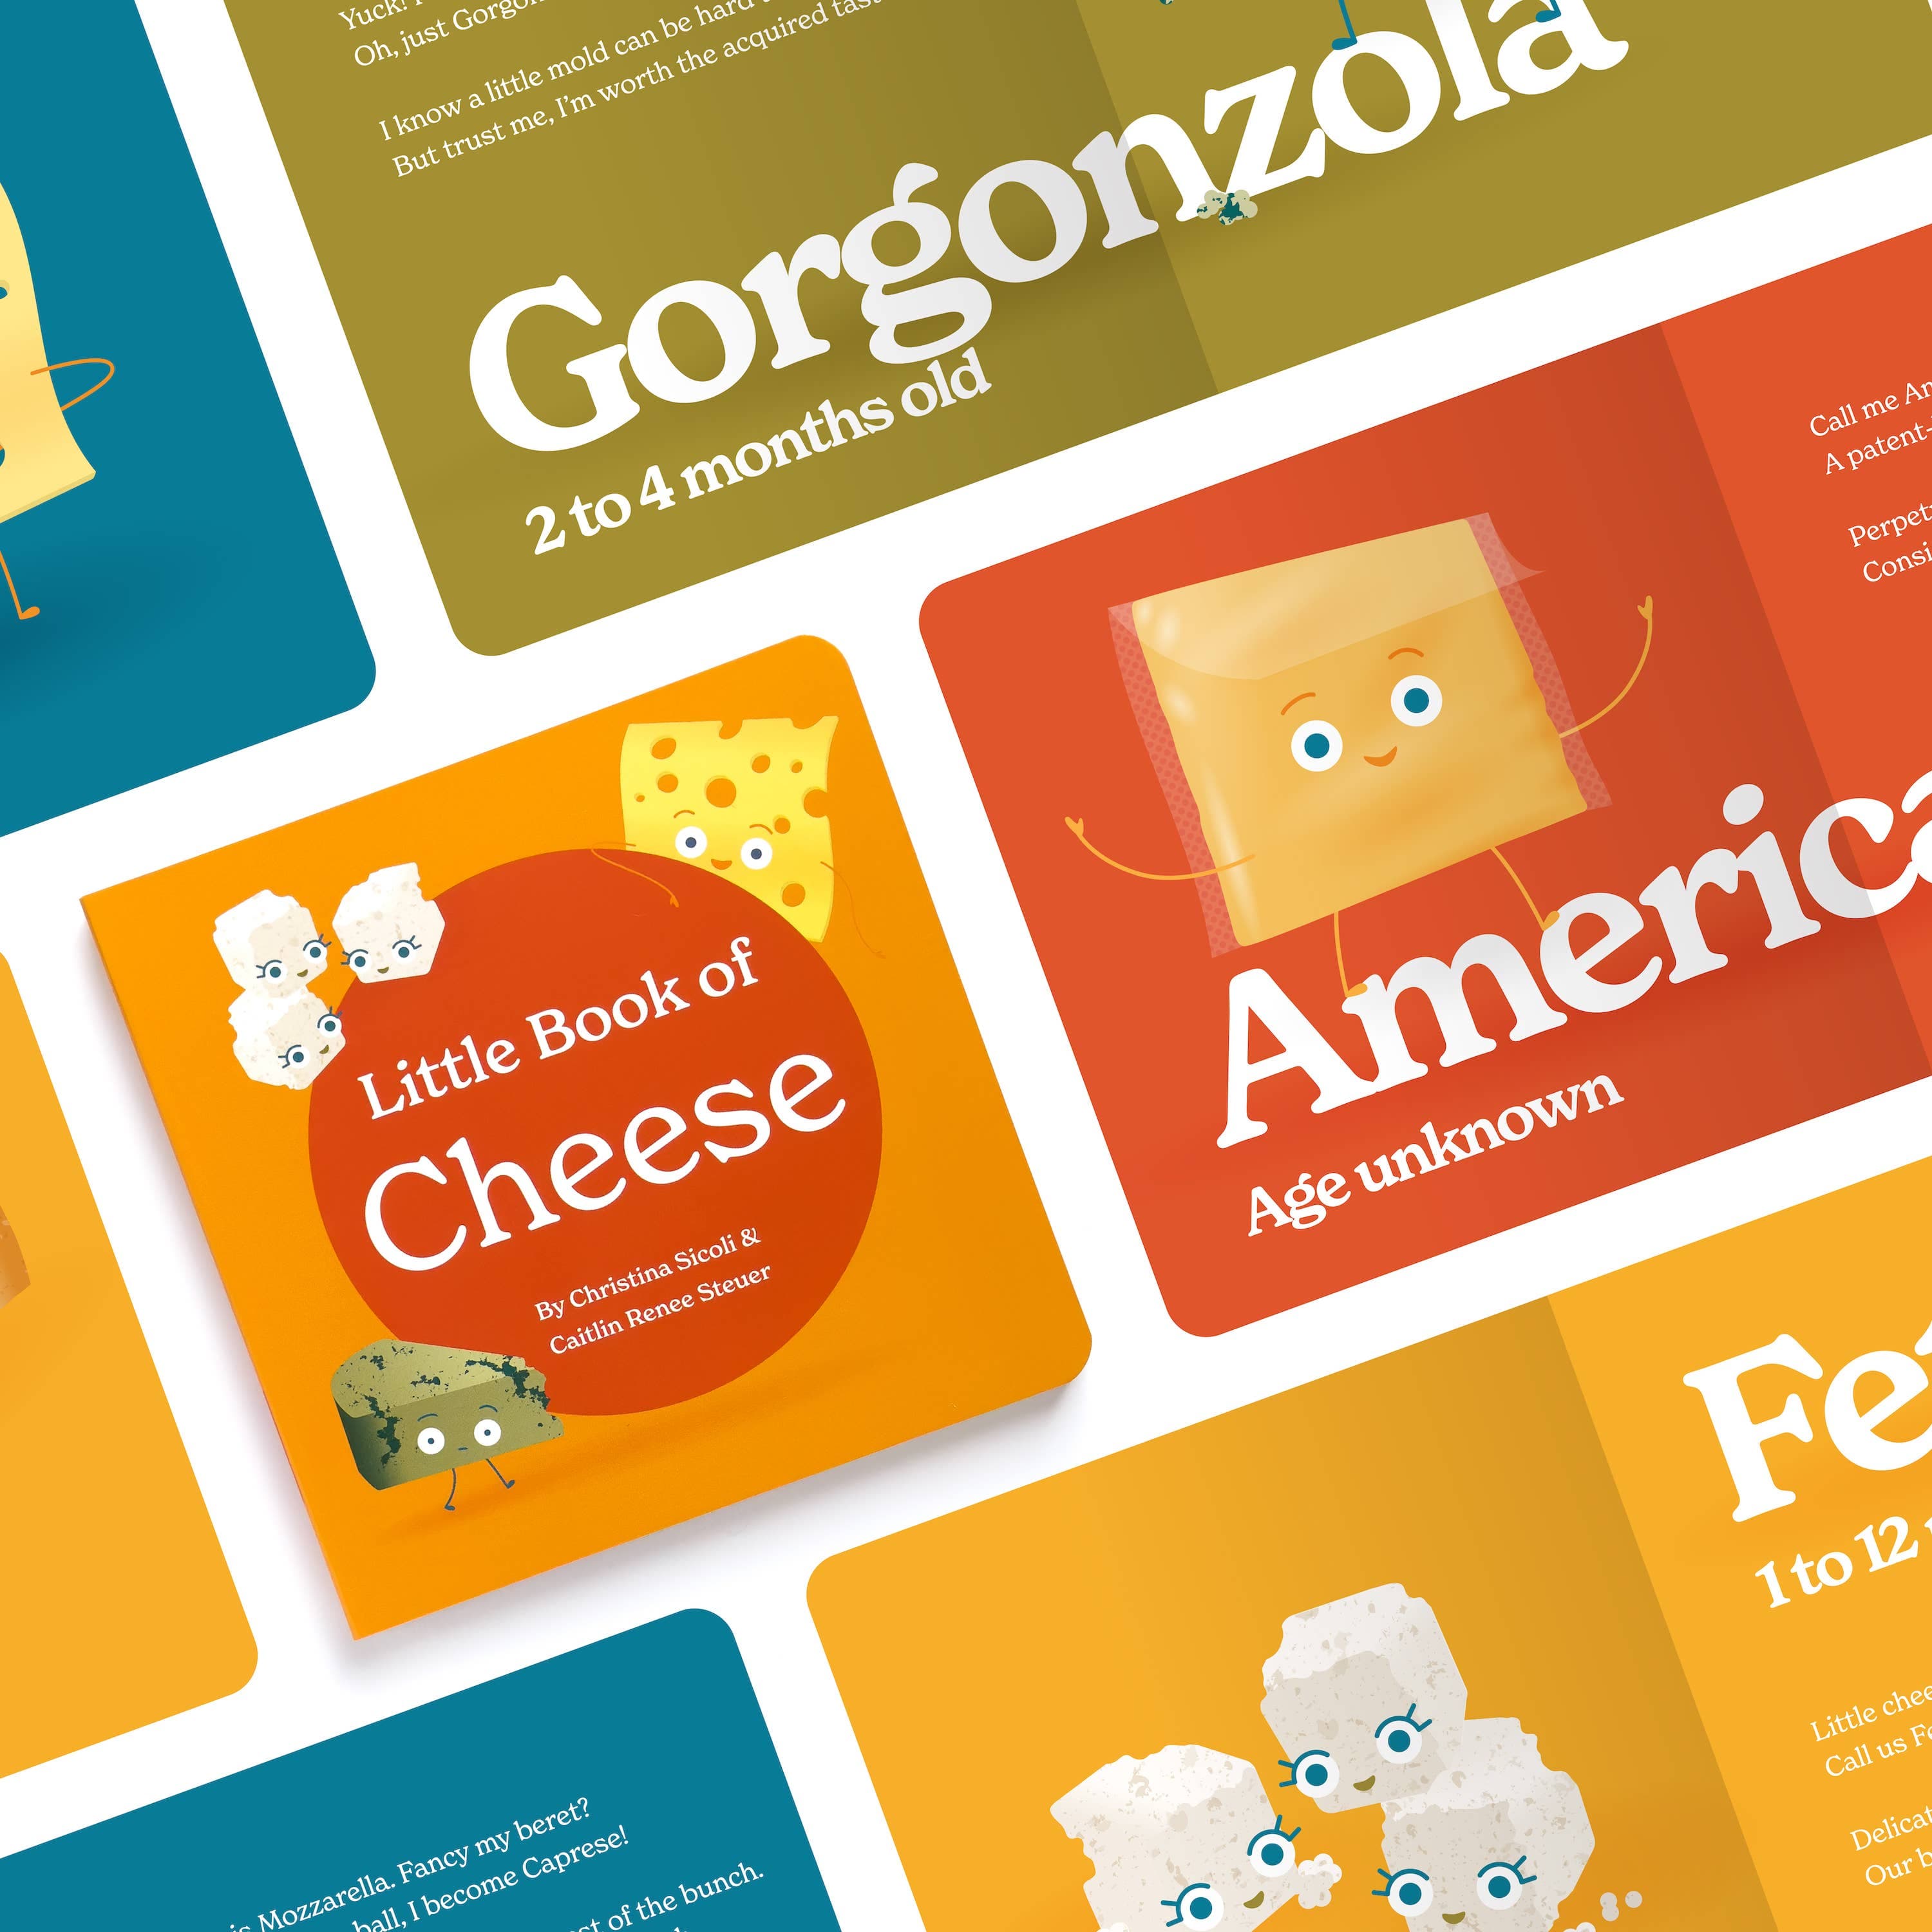 Little Book of Cheese by BlueMilk Studio